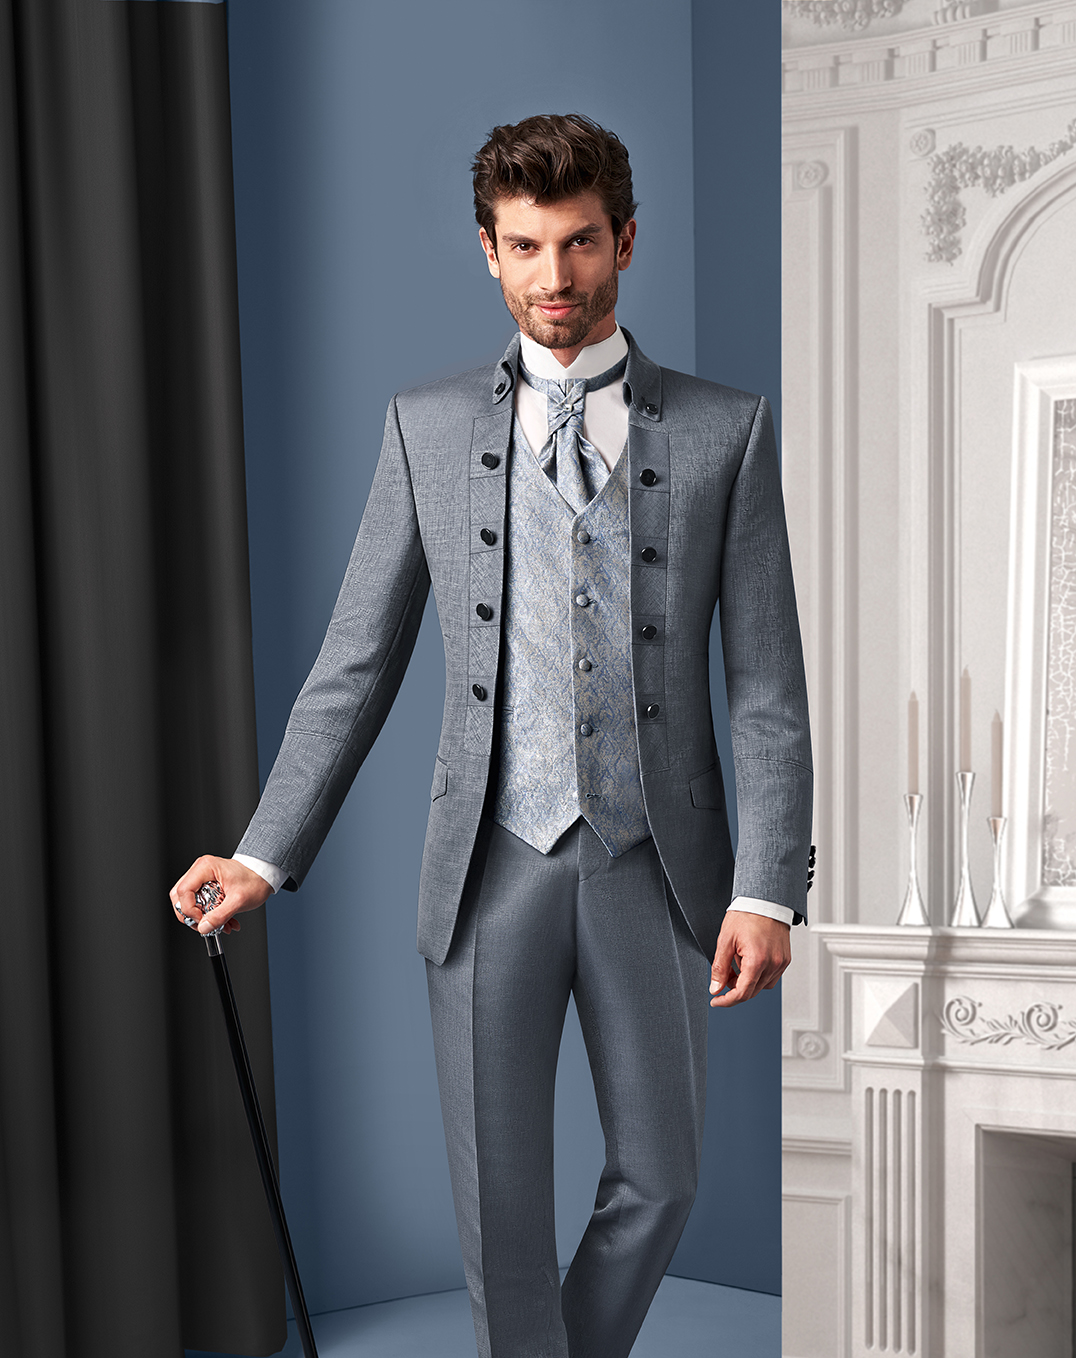 Royal Silver 3 piece Wedding Suit - Tom Murphy's Formal and Menswear